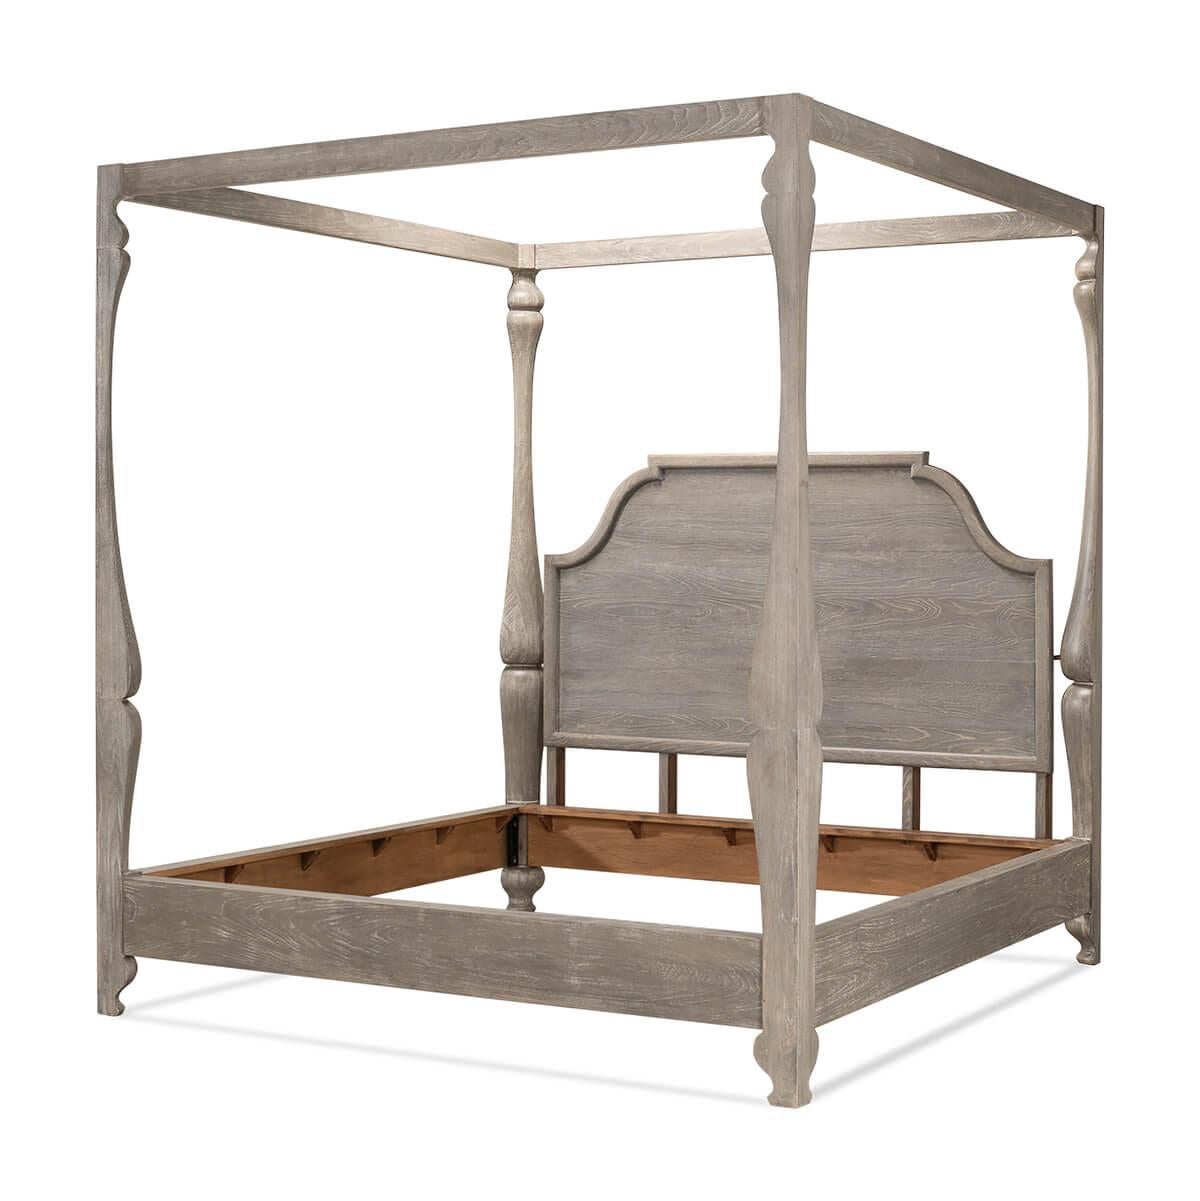 Modern European Style Canopy Bed For Sale